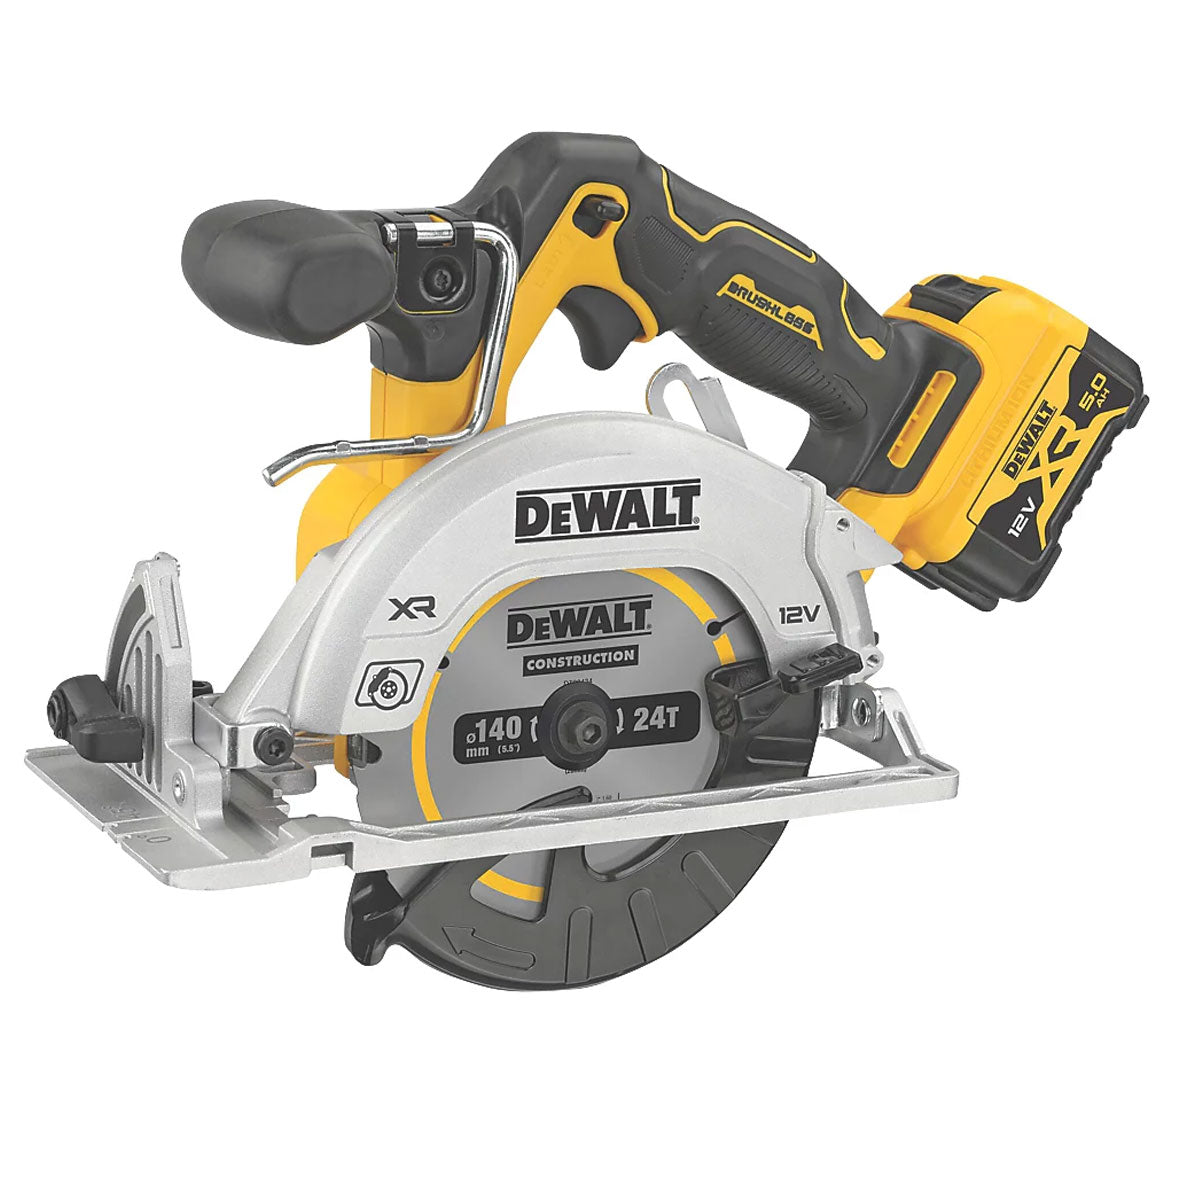 Dewalt DCS512P2 12V Brushless Circular Saw with 2 x 5.0Ah Batteries Charger In Case